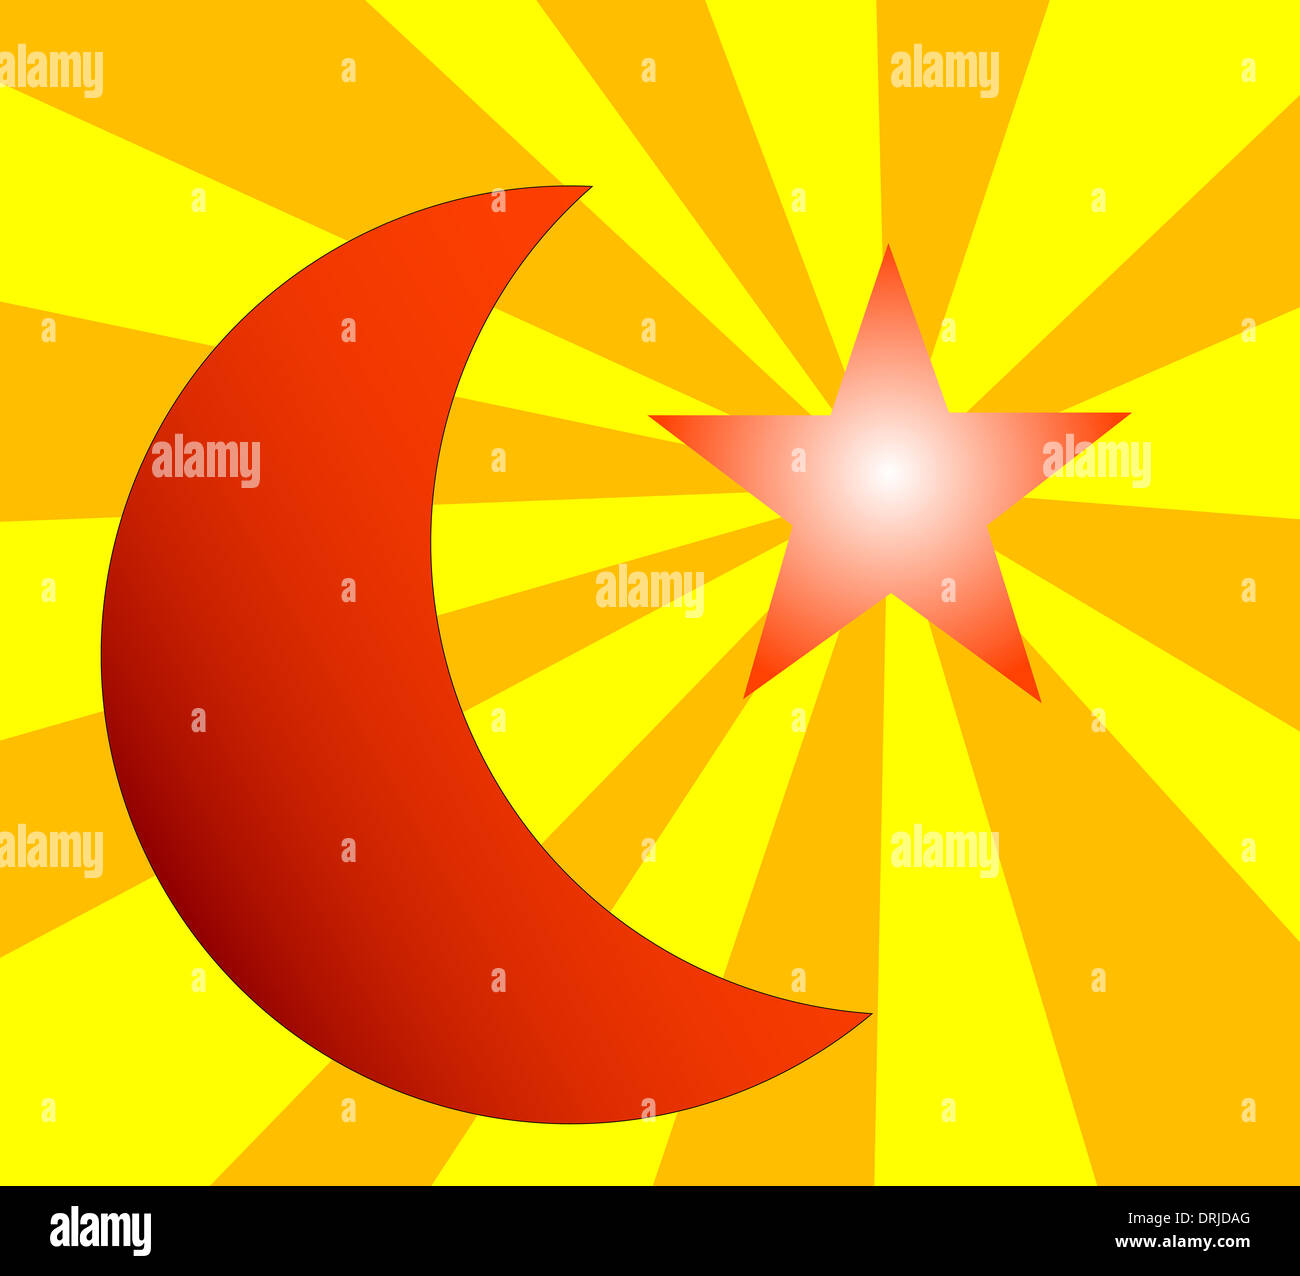 A depiction of the Muslim crescent moon and star with rays eminating from the star. Stock Photo